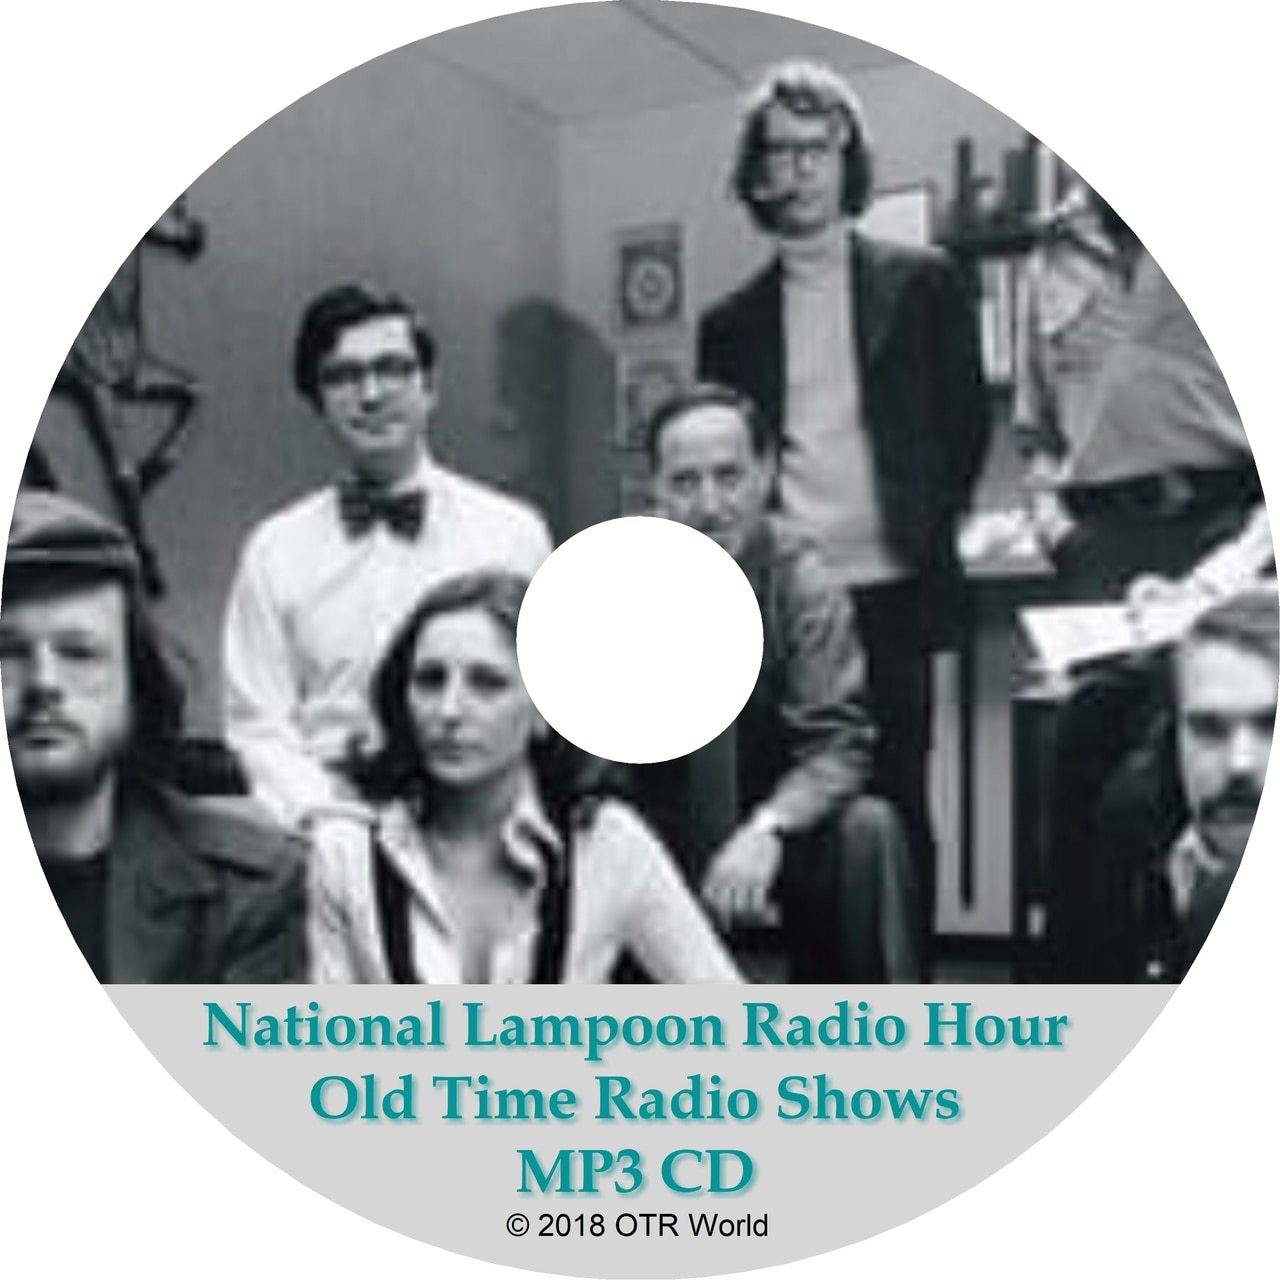 National Lampoon Radio Hour Old Time Radio Shows 27 Episodes On MP3 CD OTR OTRS - OTR World